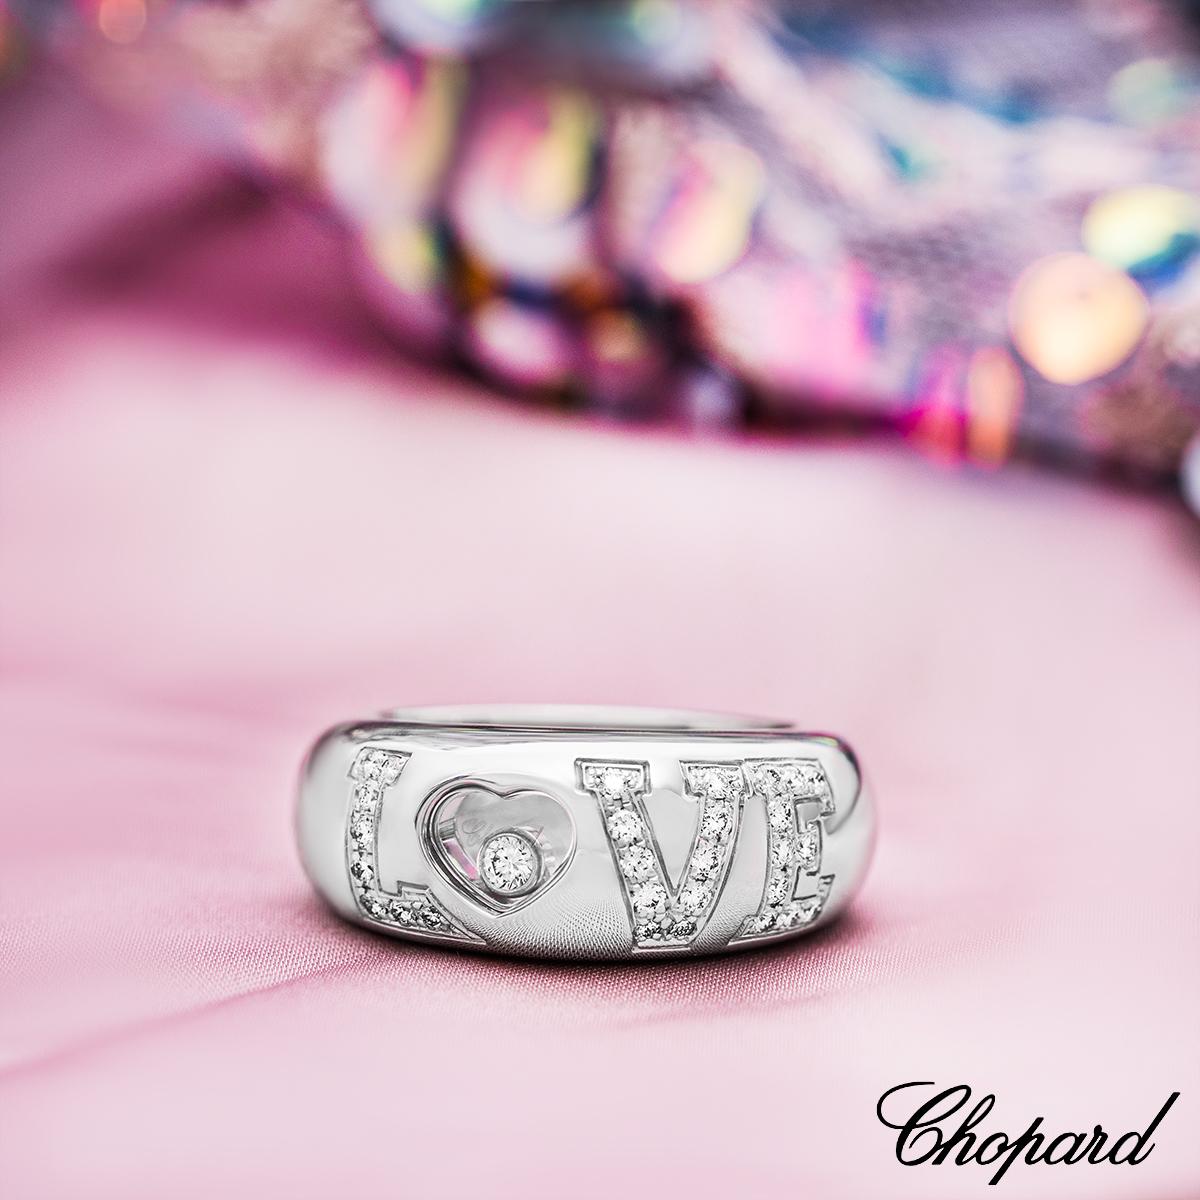 chopard for love ring